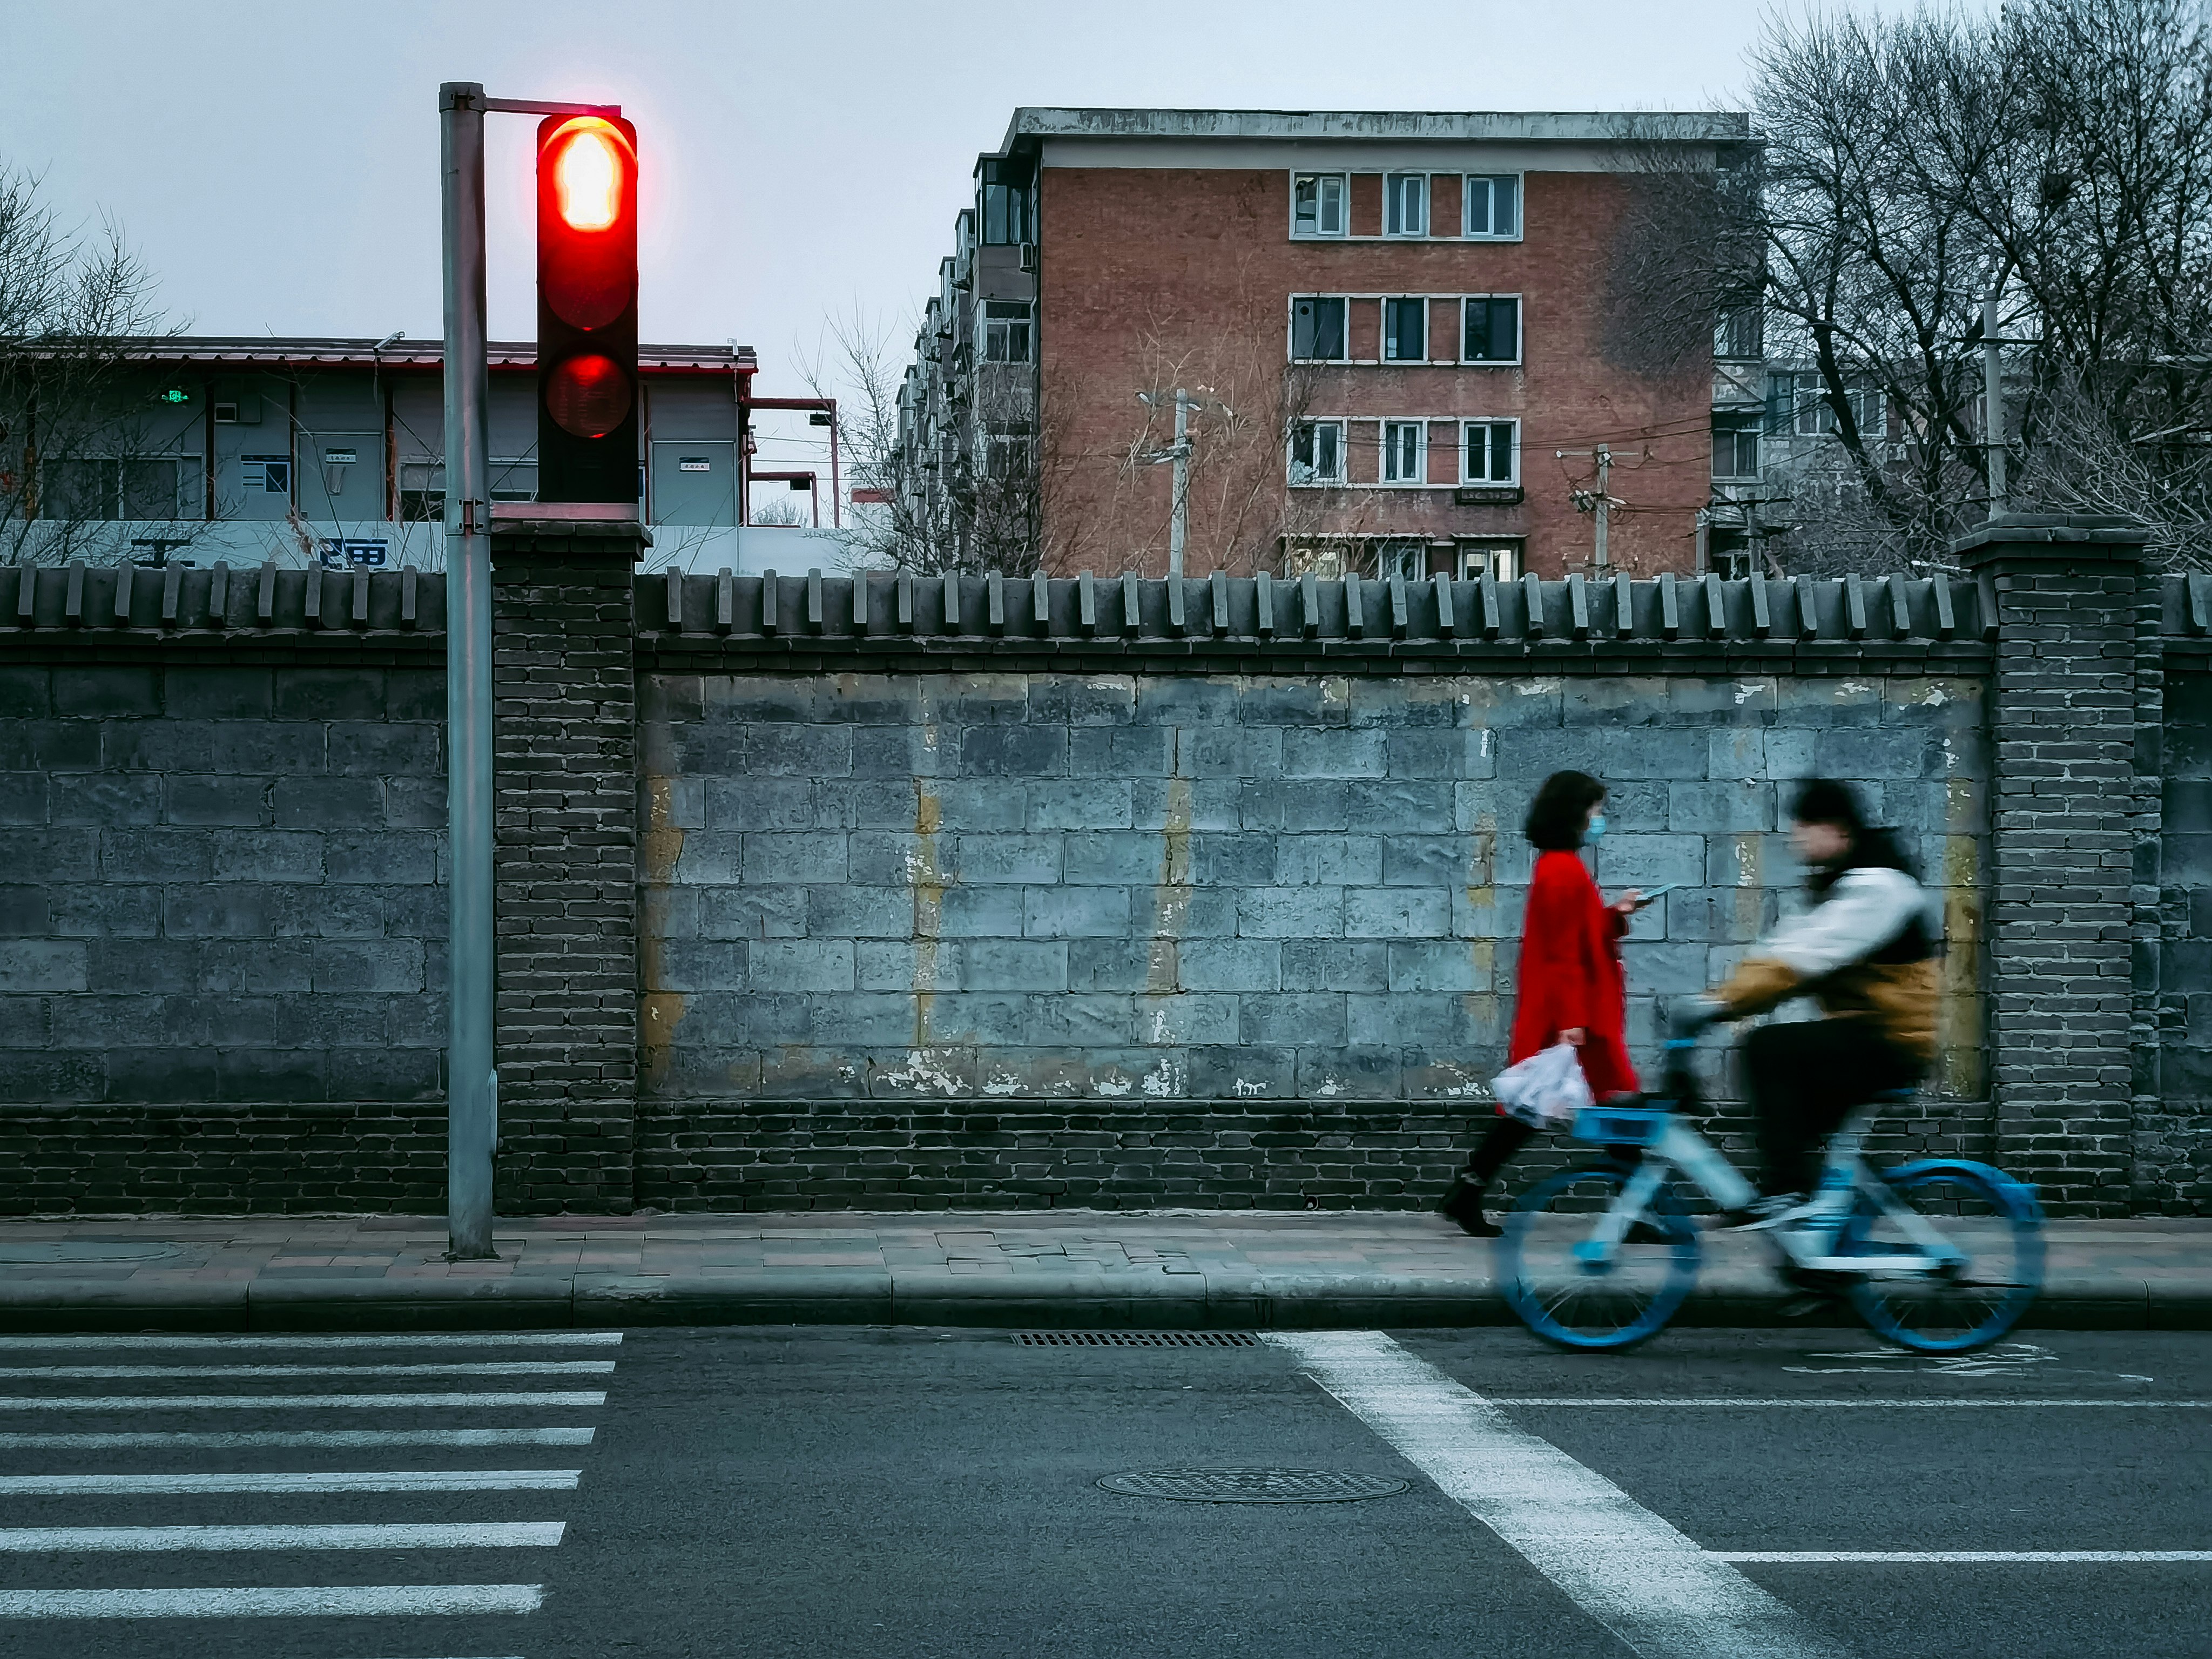 man in red jacket riding bicycle on road during daytime